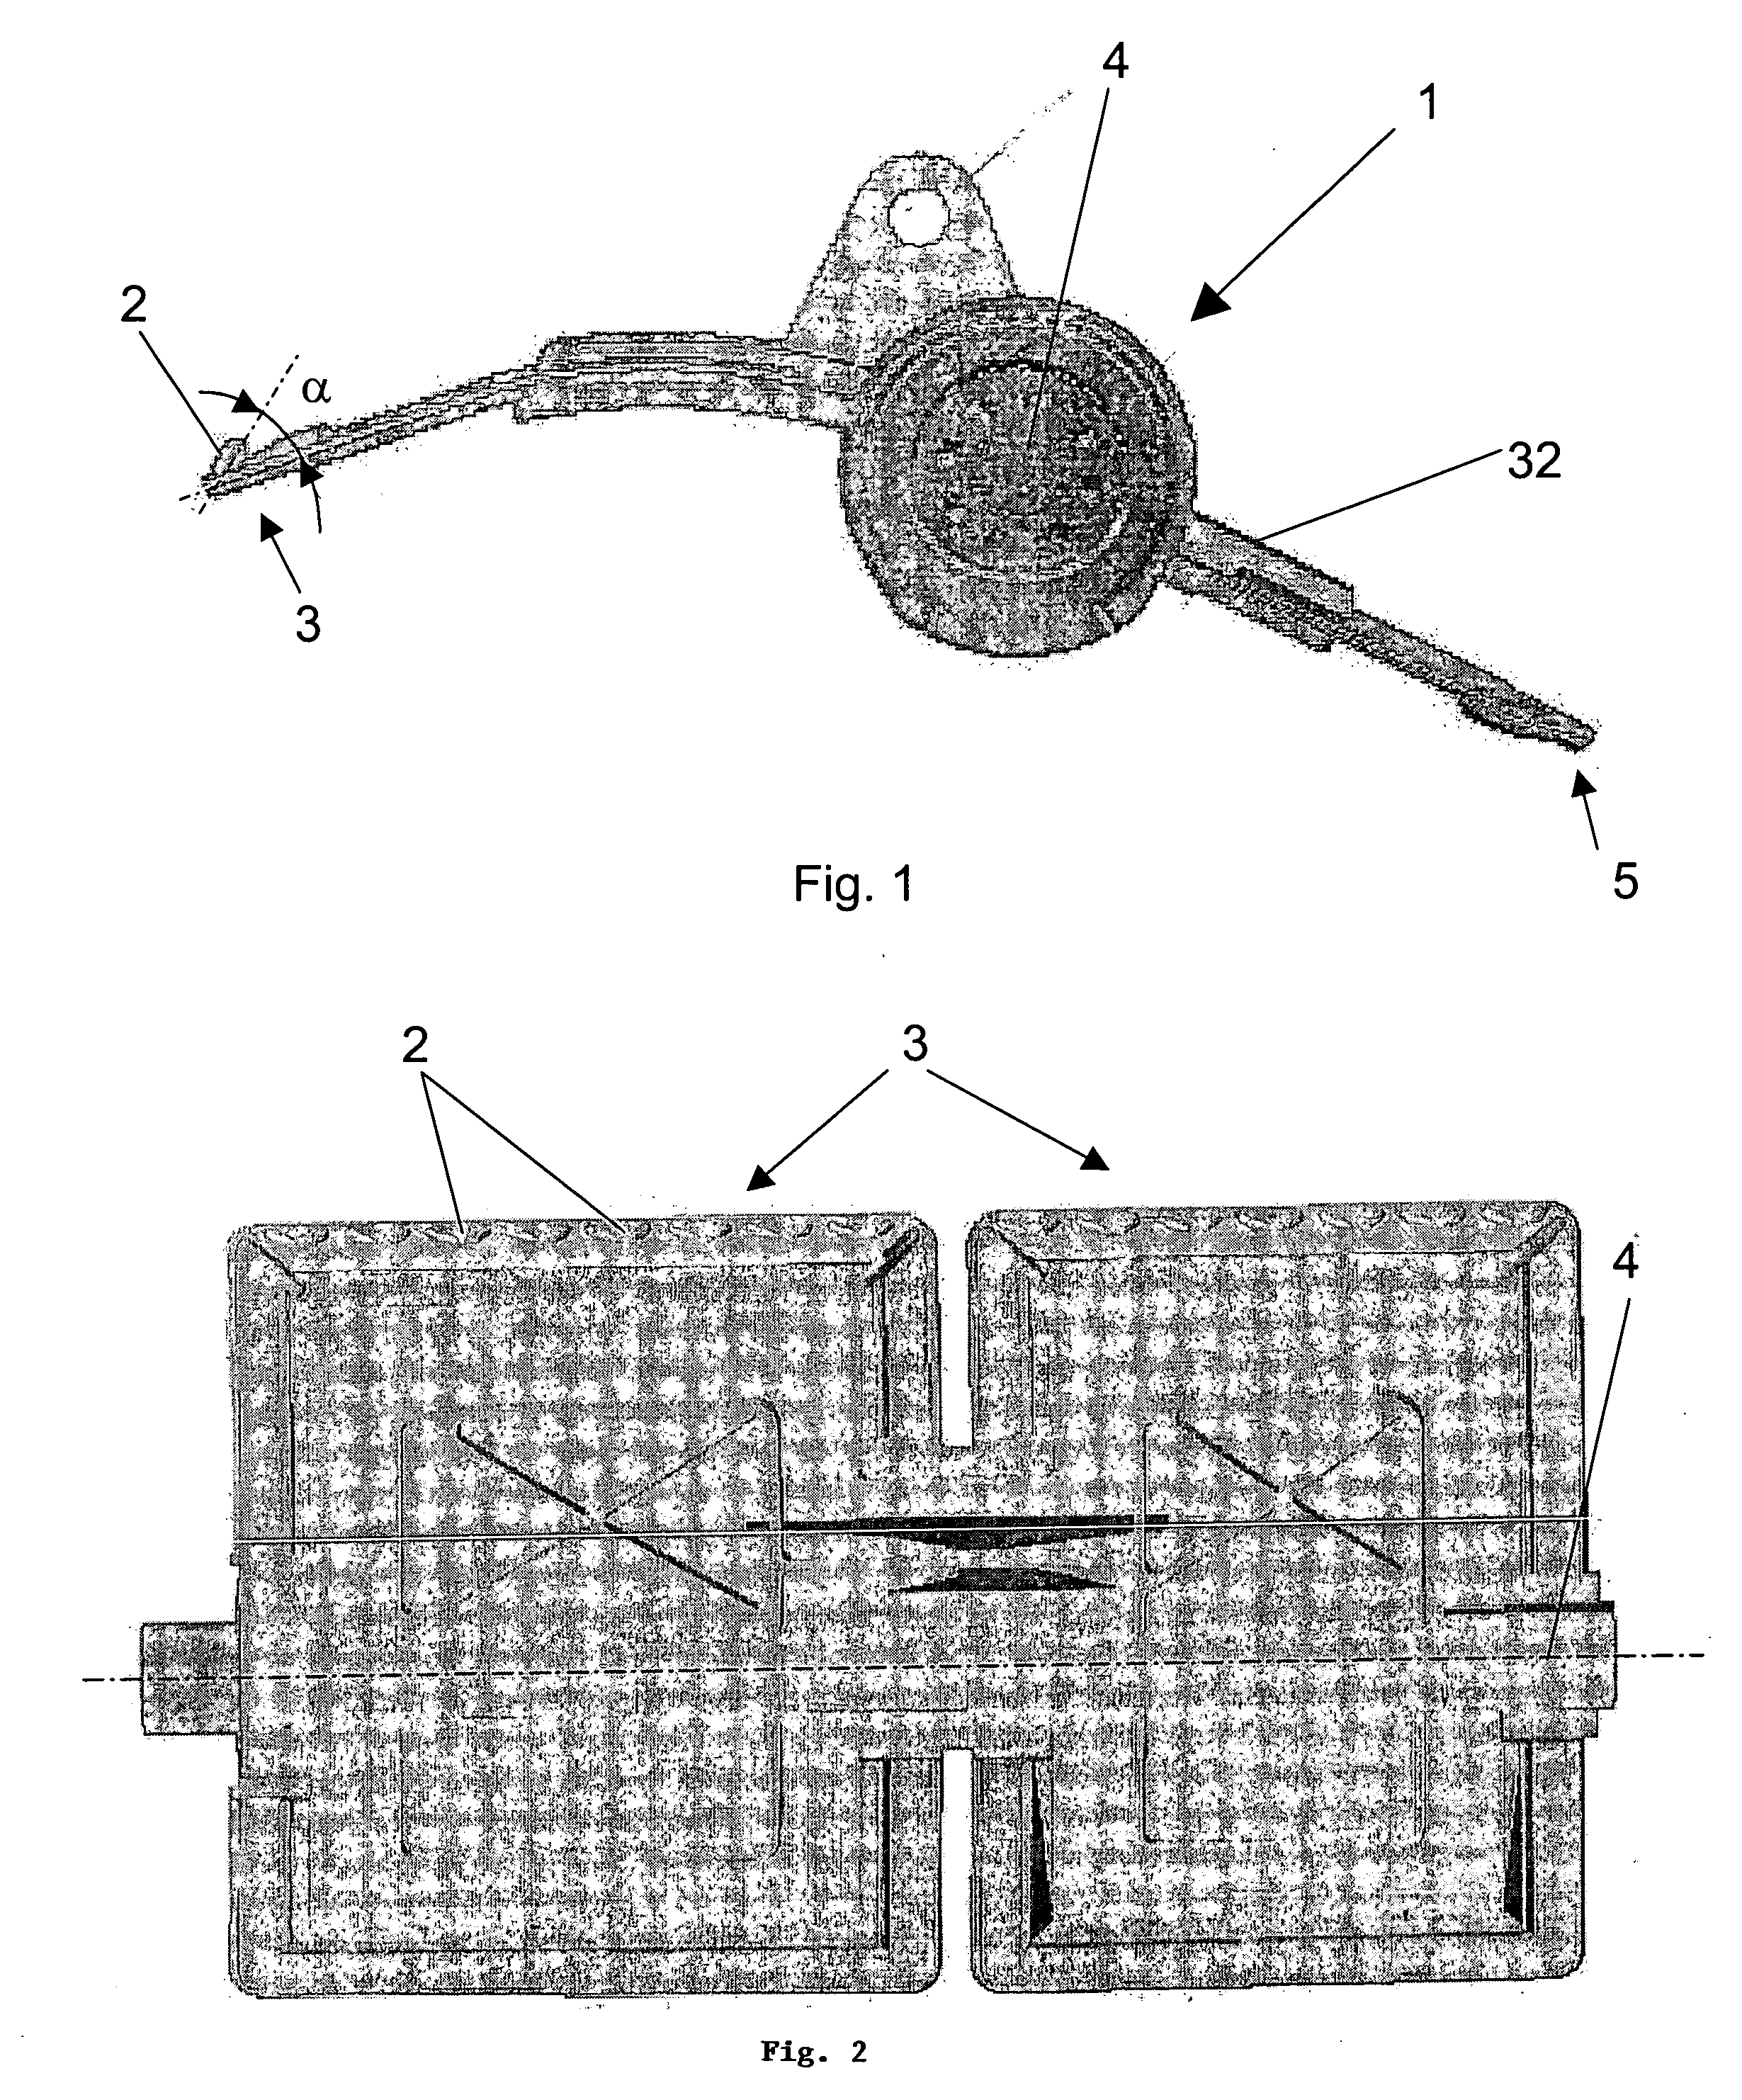 Control valve for a ventilation system of an automobile